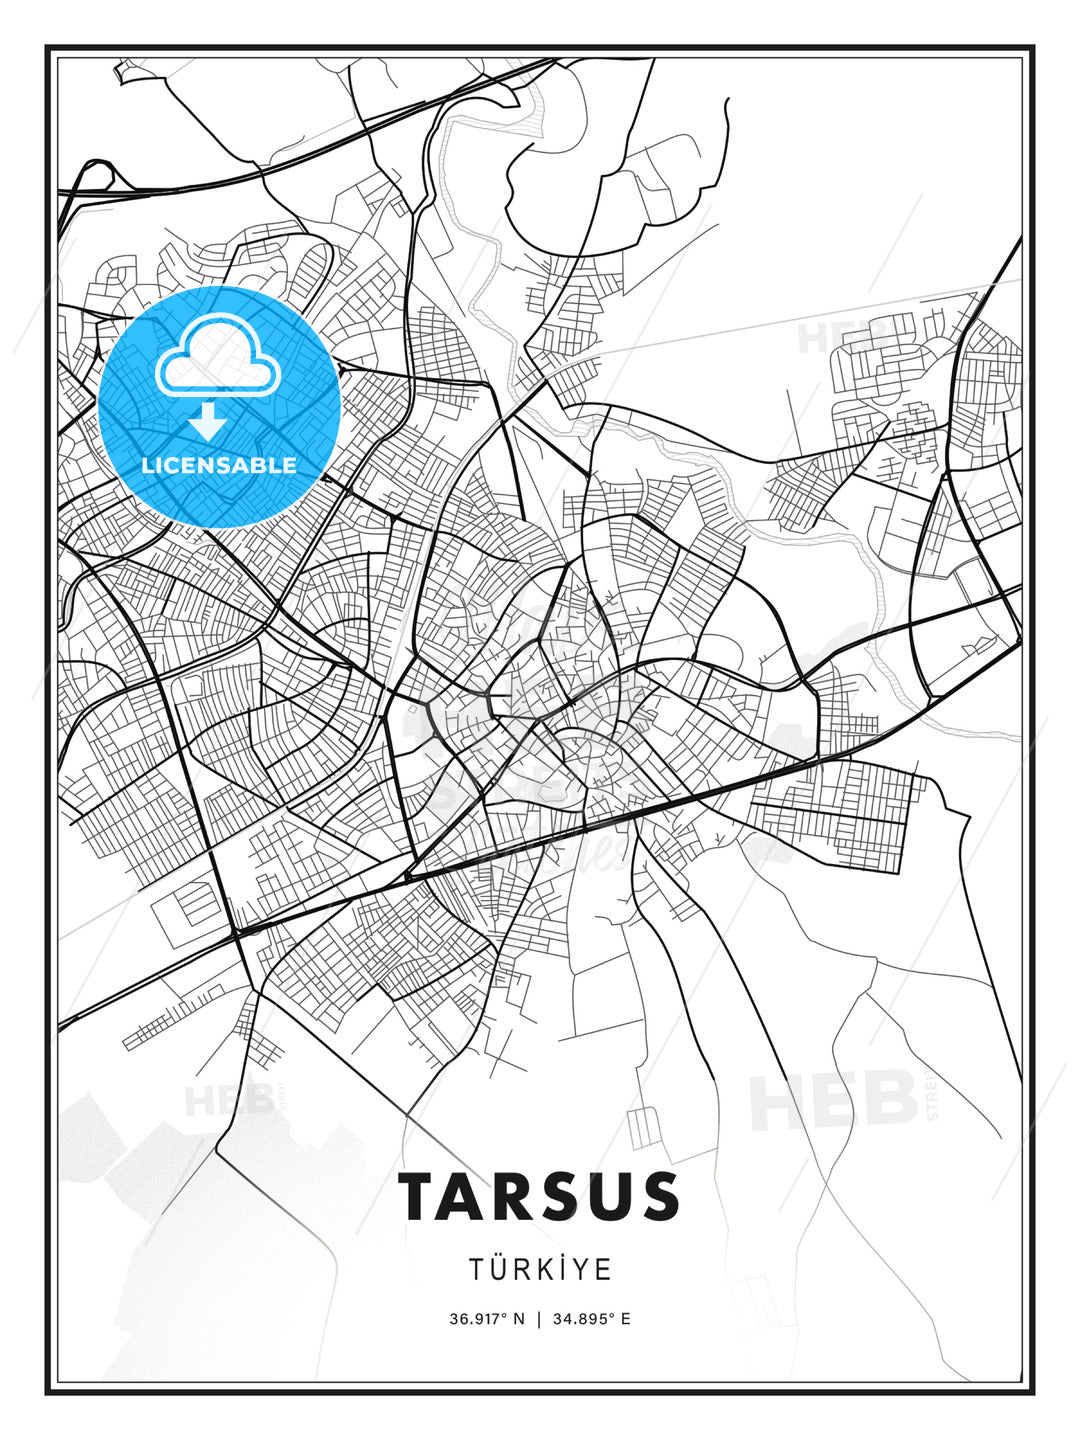 Tarsus, Turkey, Modern Print Template in Various Formats - HEBSTREITS Sketches